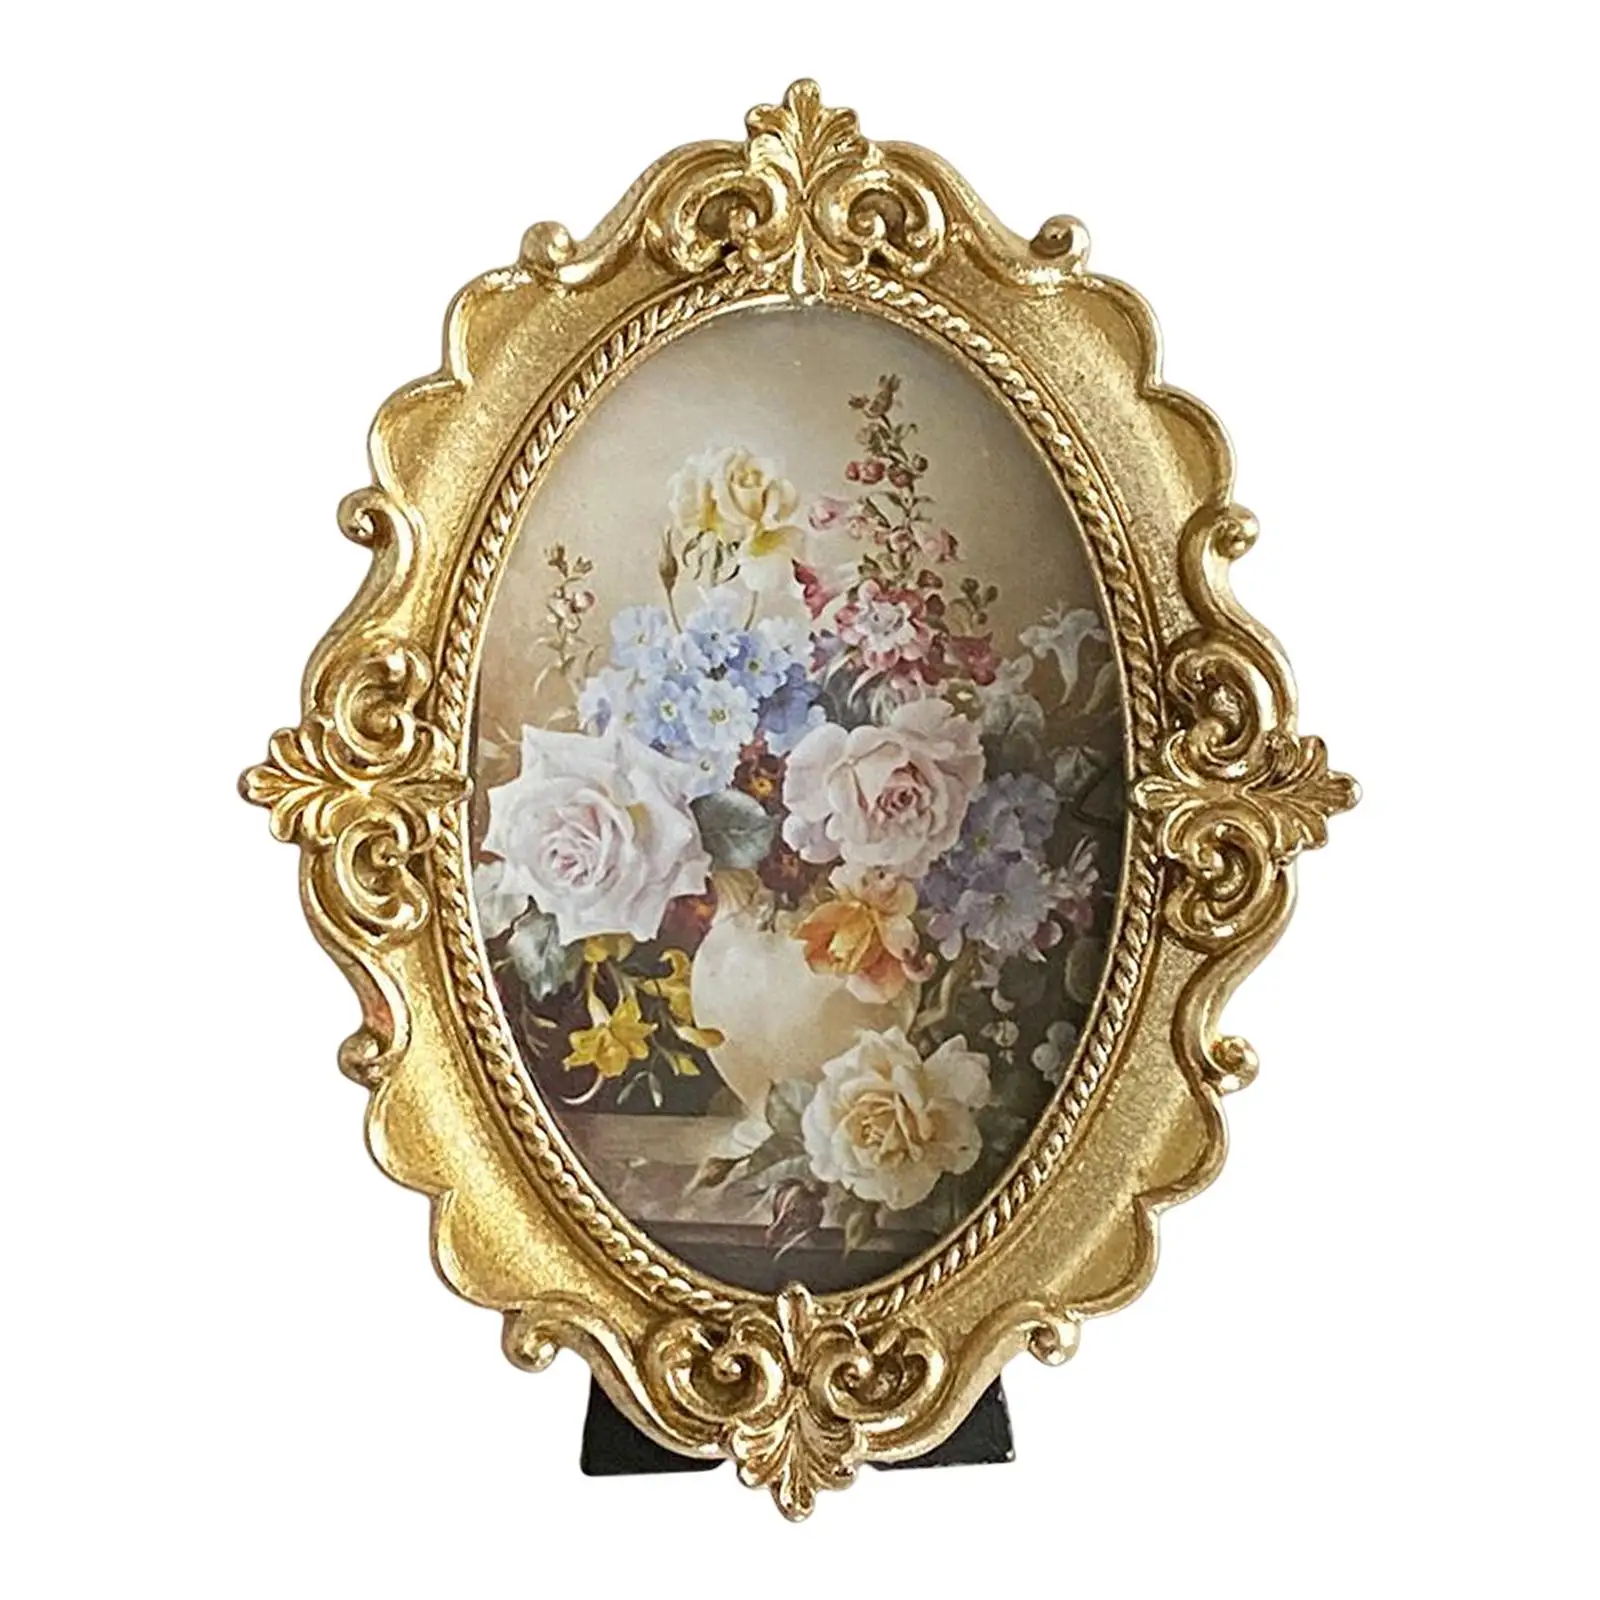 Photo Frame Picture Display Holder Tabletop Wall Hanging Ornate Resin Picture Frame for Living Room Bedroom Hallway Home Decor